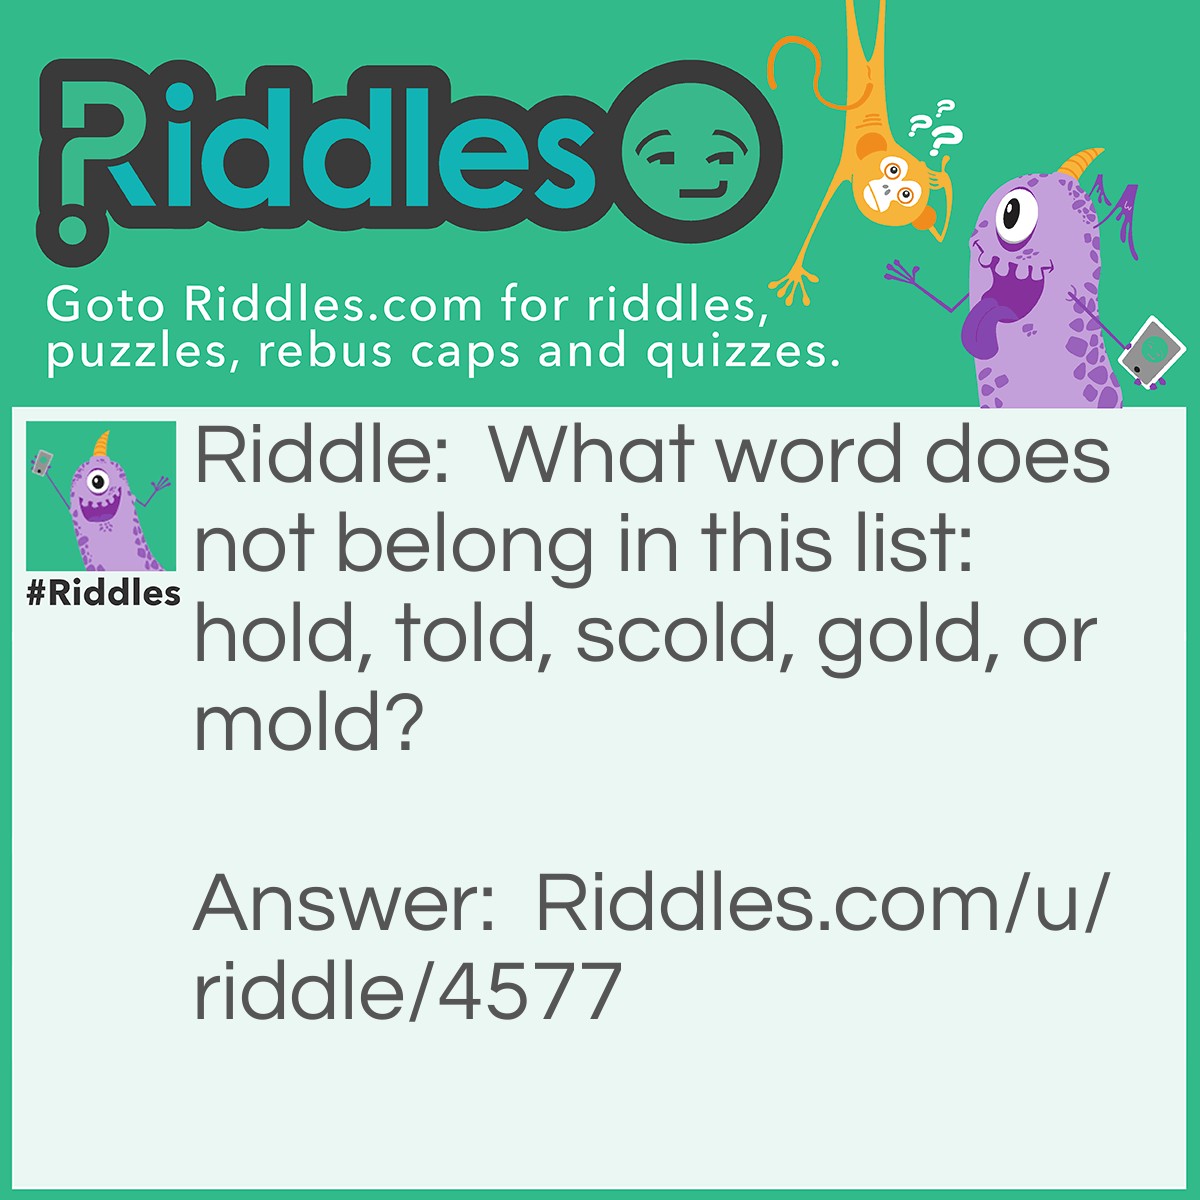 Riddle: What word does not belong in this list: hold, told, scold, gold, or mold? Answer: Or.